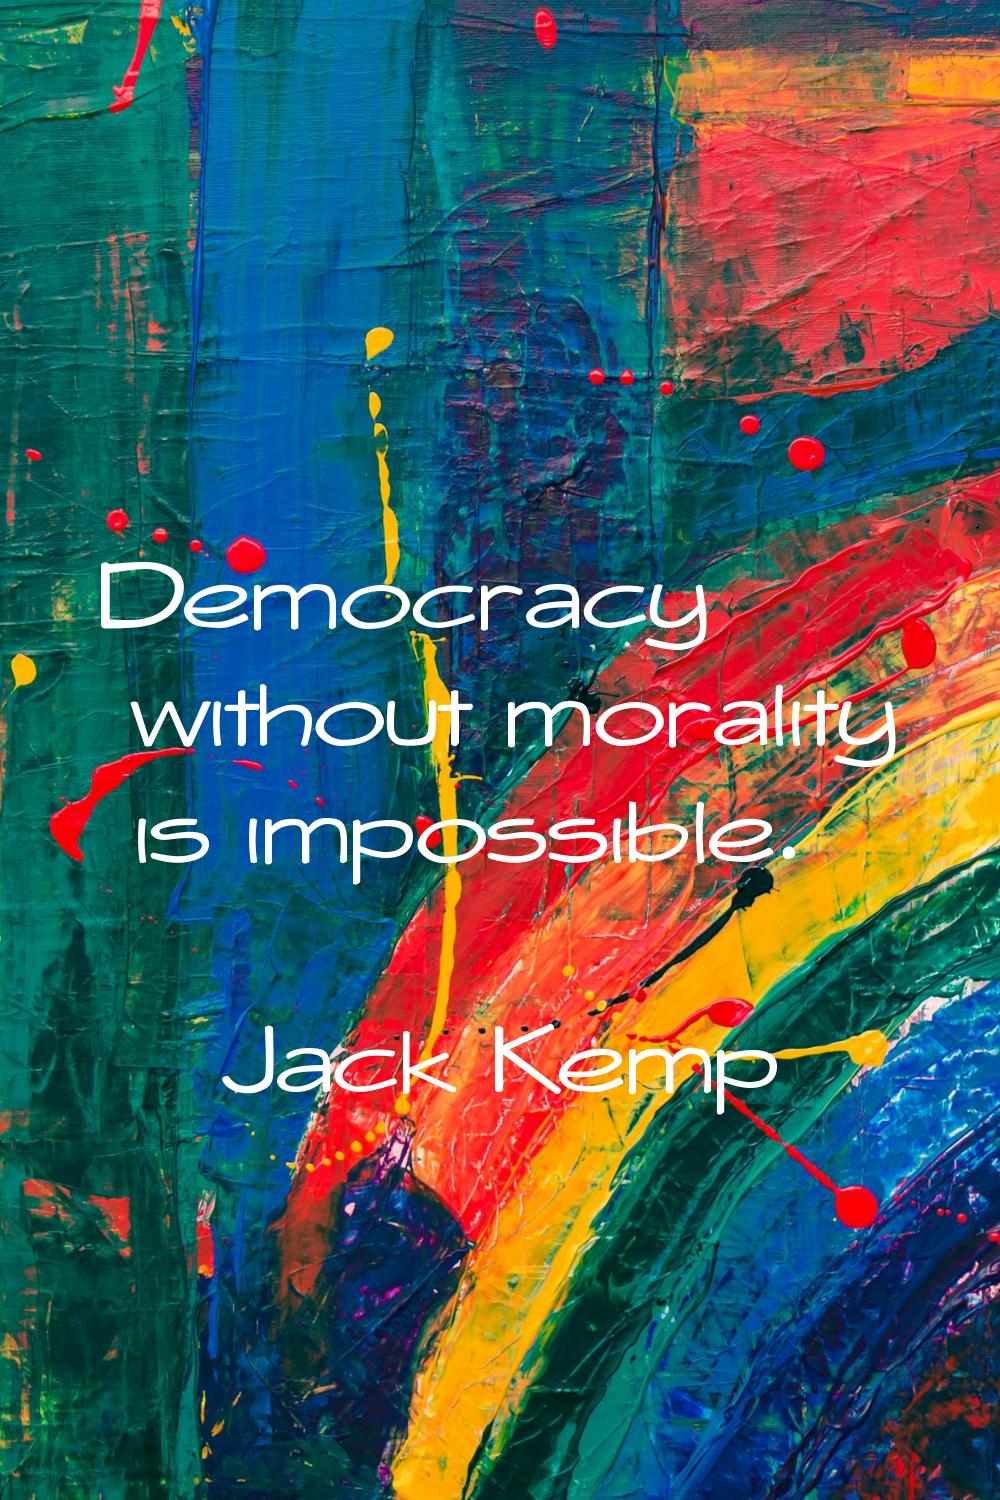 Democracy without morality is impossible.